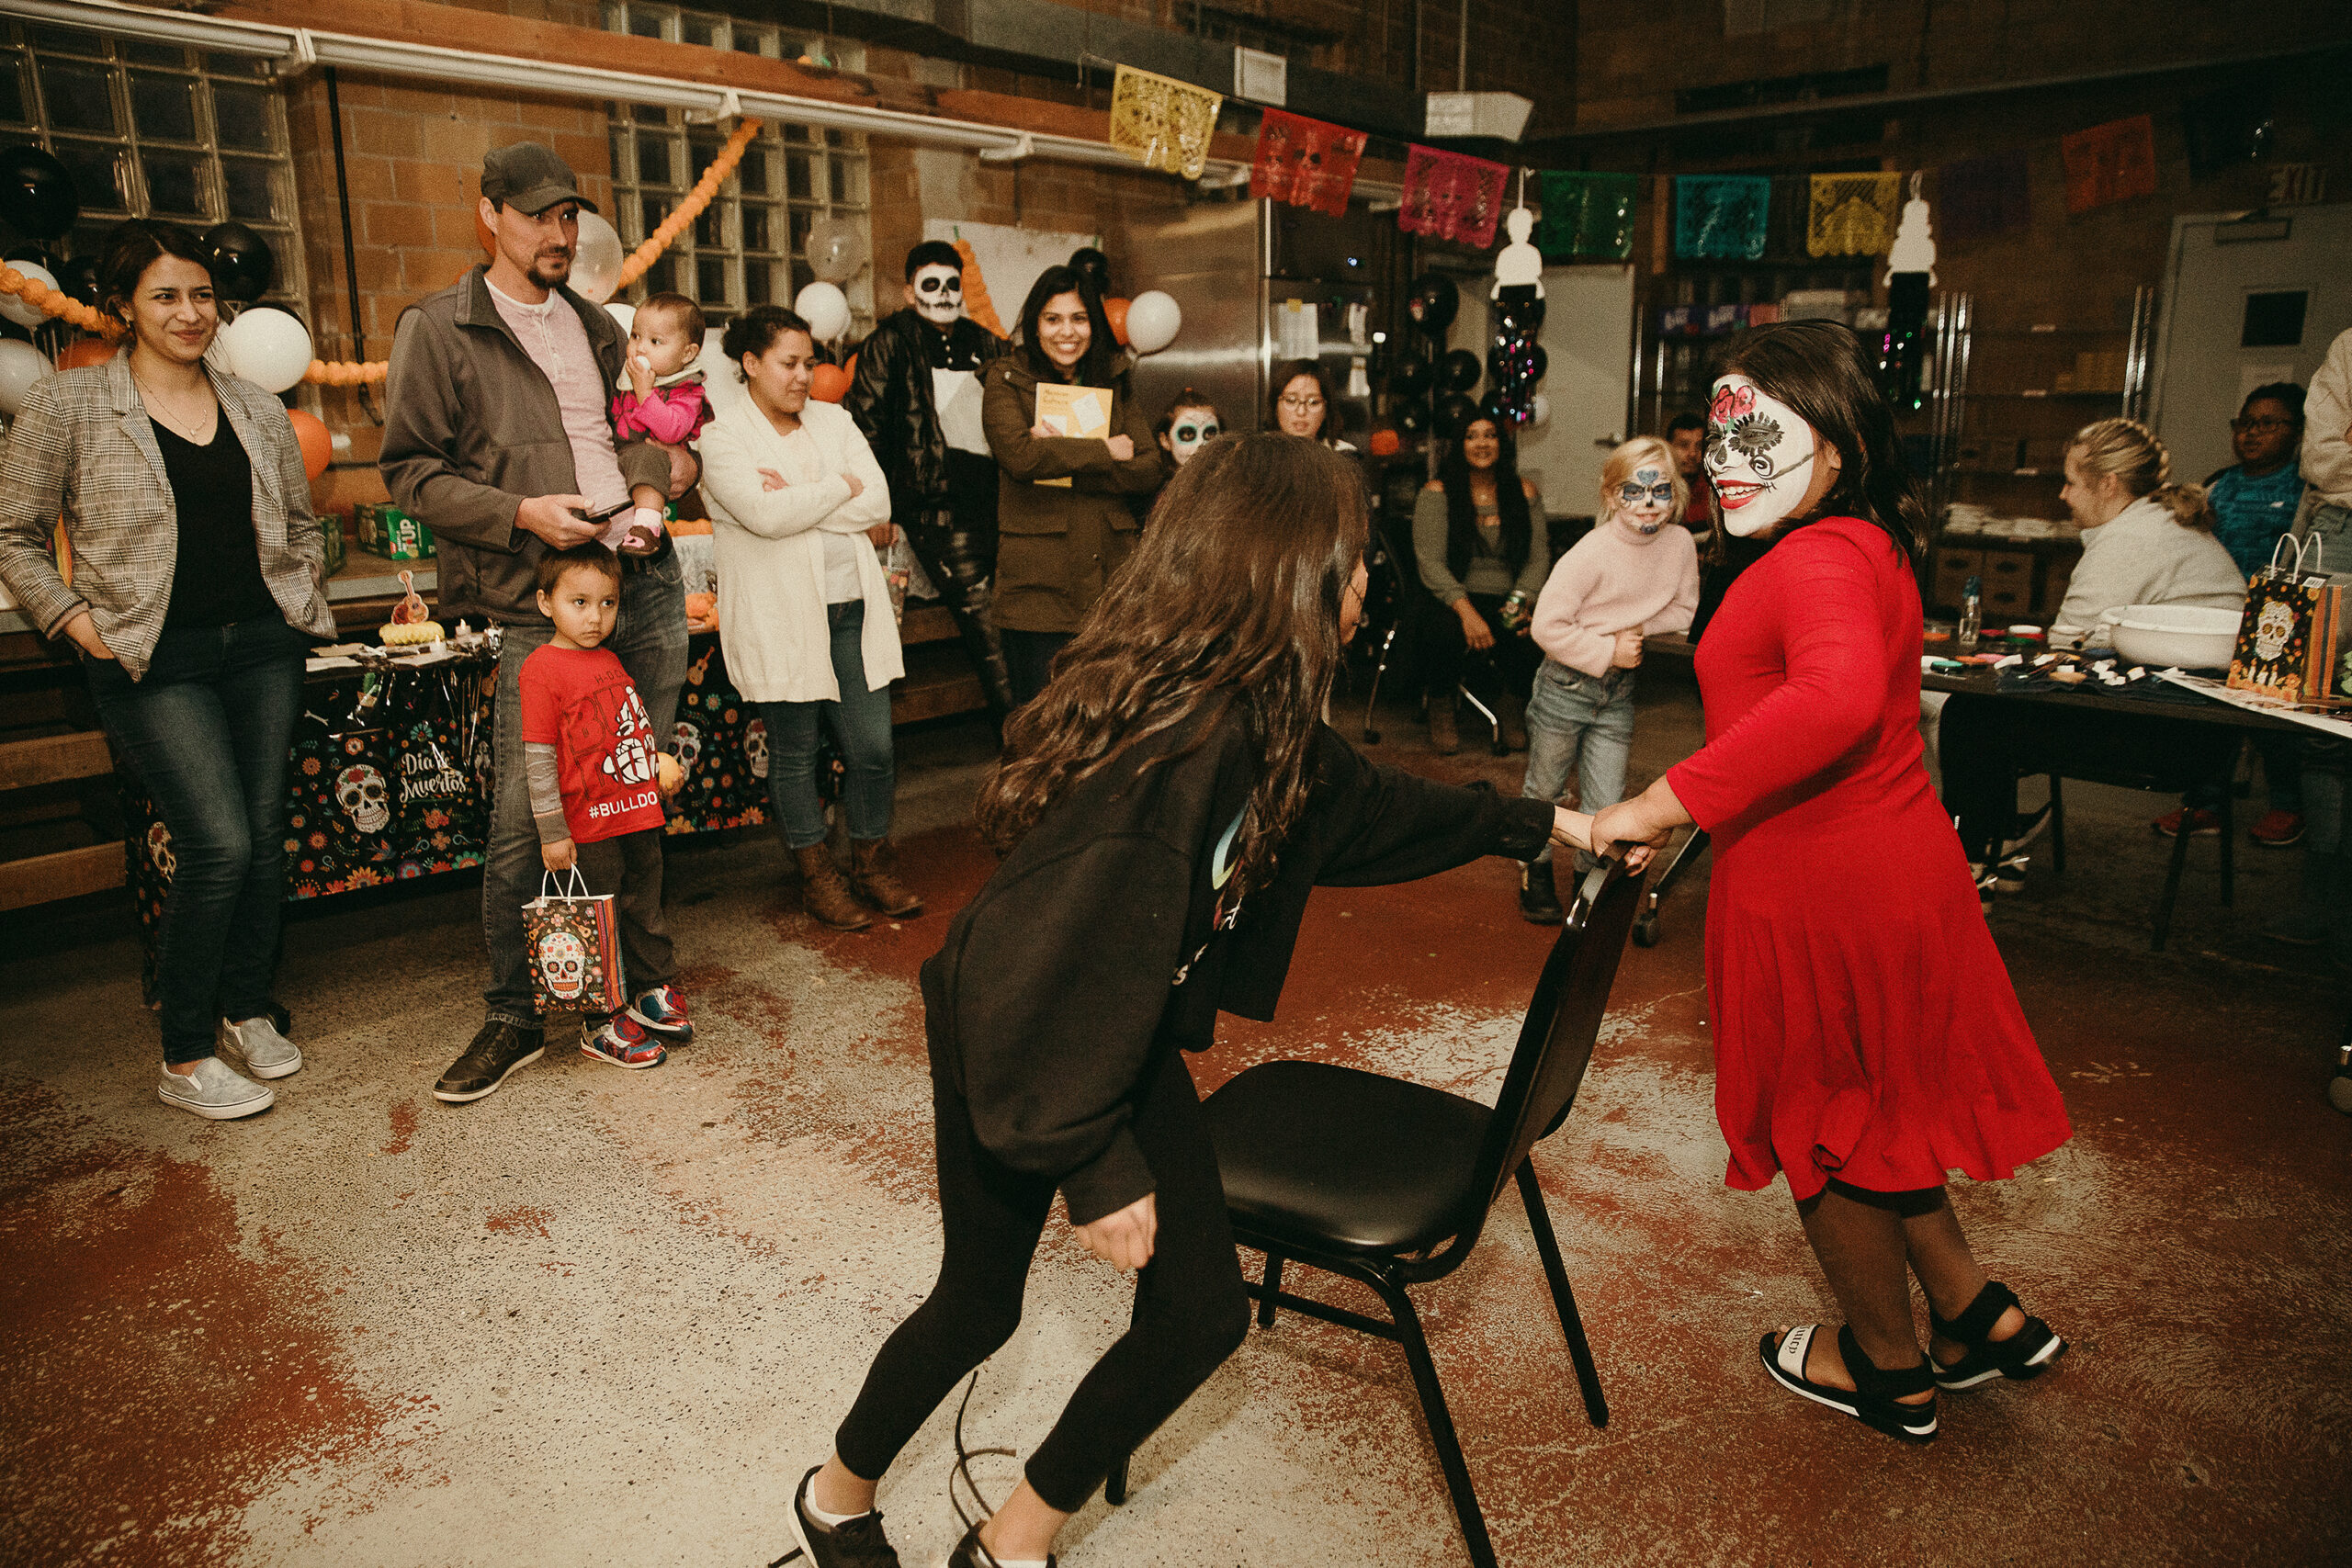 Two young people dance around a chair as others gather around them, as part of Dia de Los Muertos cultural celebration at La Luz Centro Cultural.